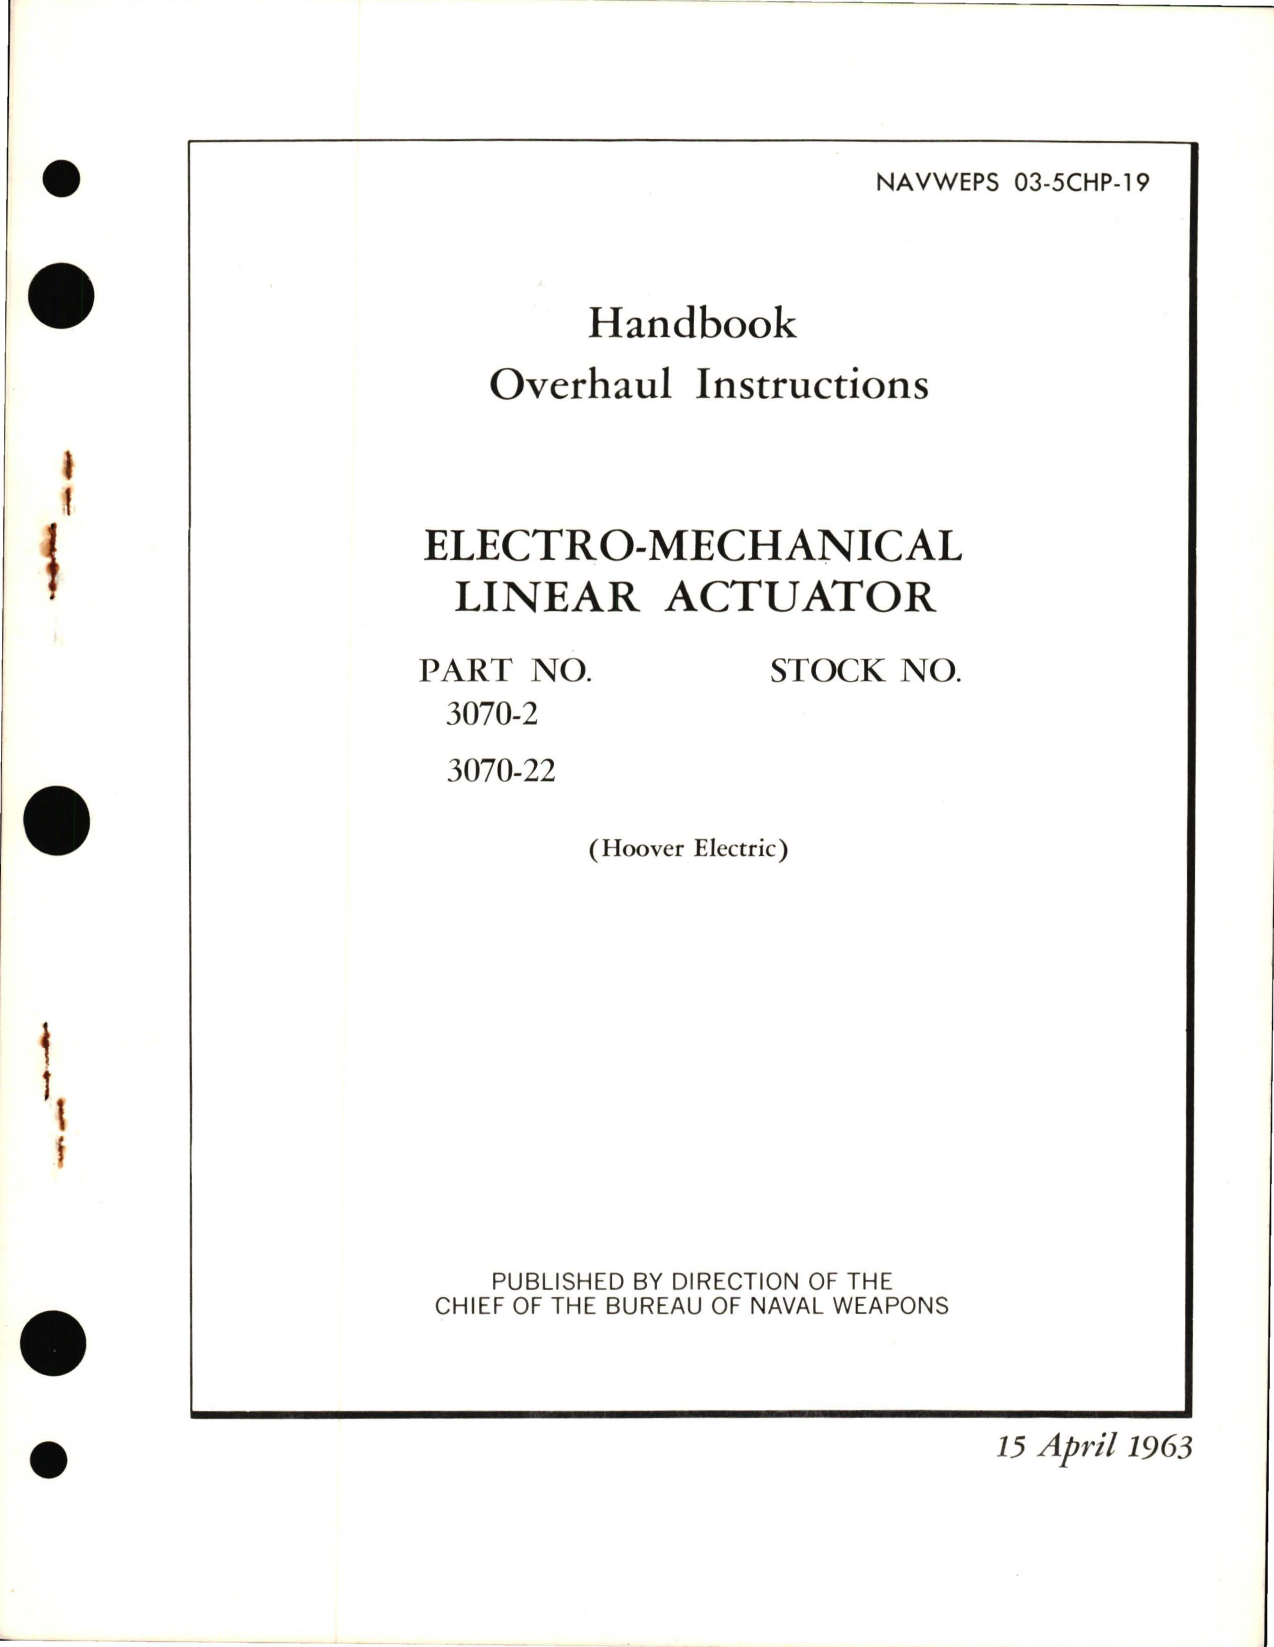 Sample page 1 from AirCorps Library document: Overhaul Instructions for Electro-Mechanical Linear Actuator 3070-2 and 36070-22